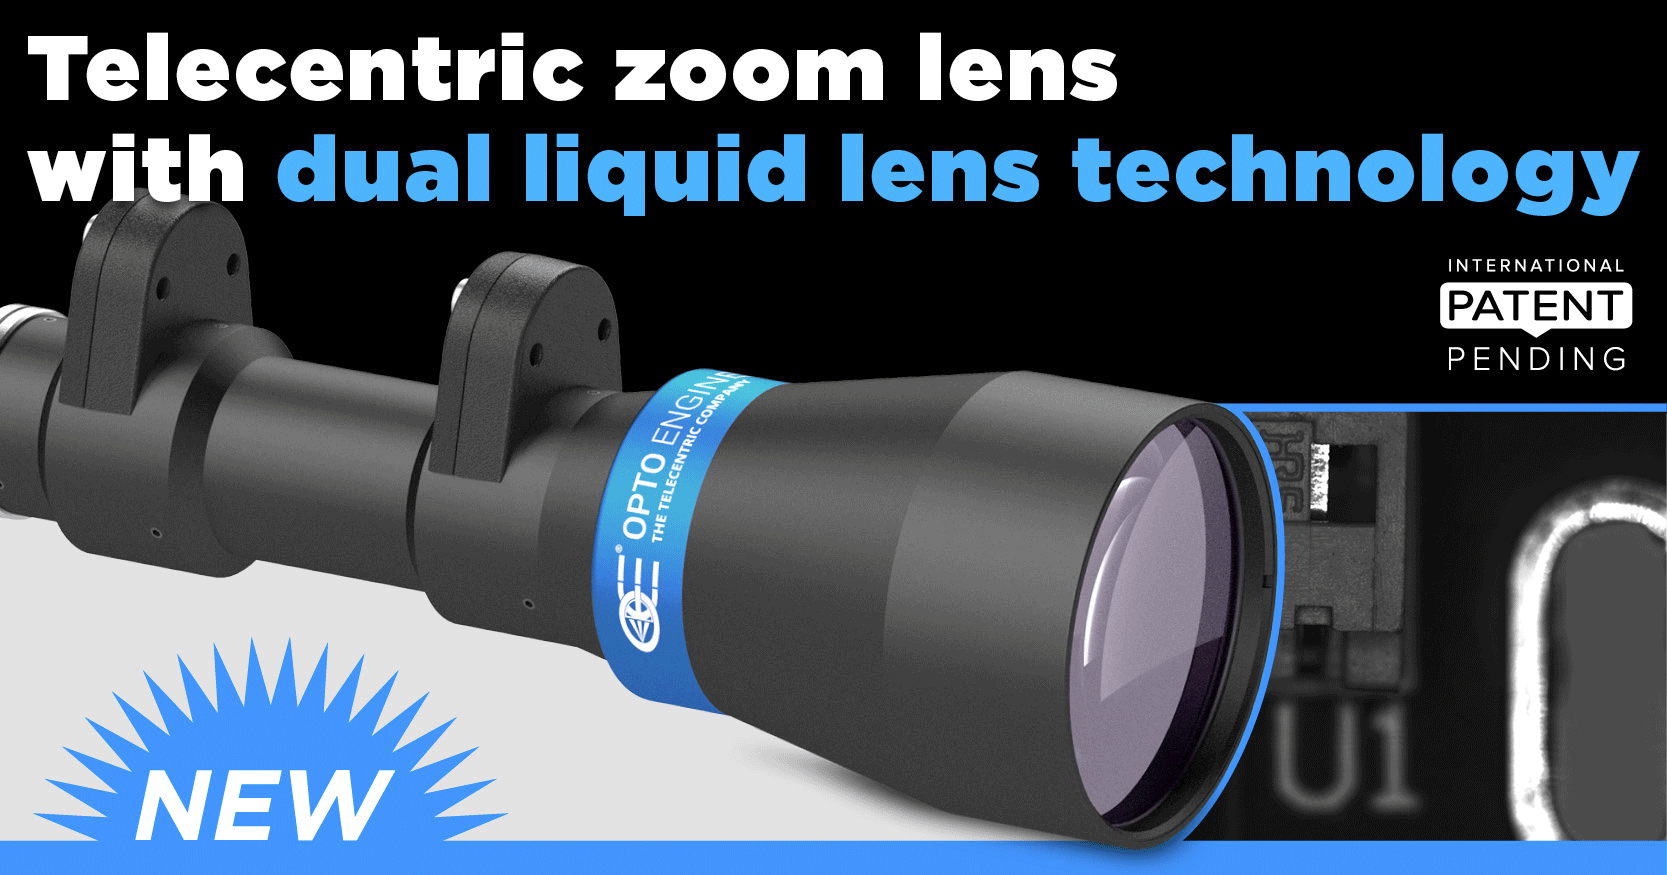 Telecentric zoom lens with dual liquid lens technology